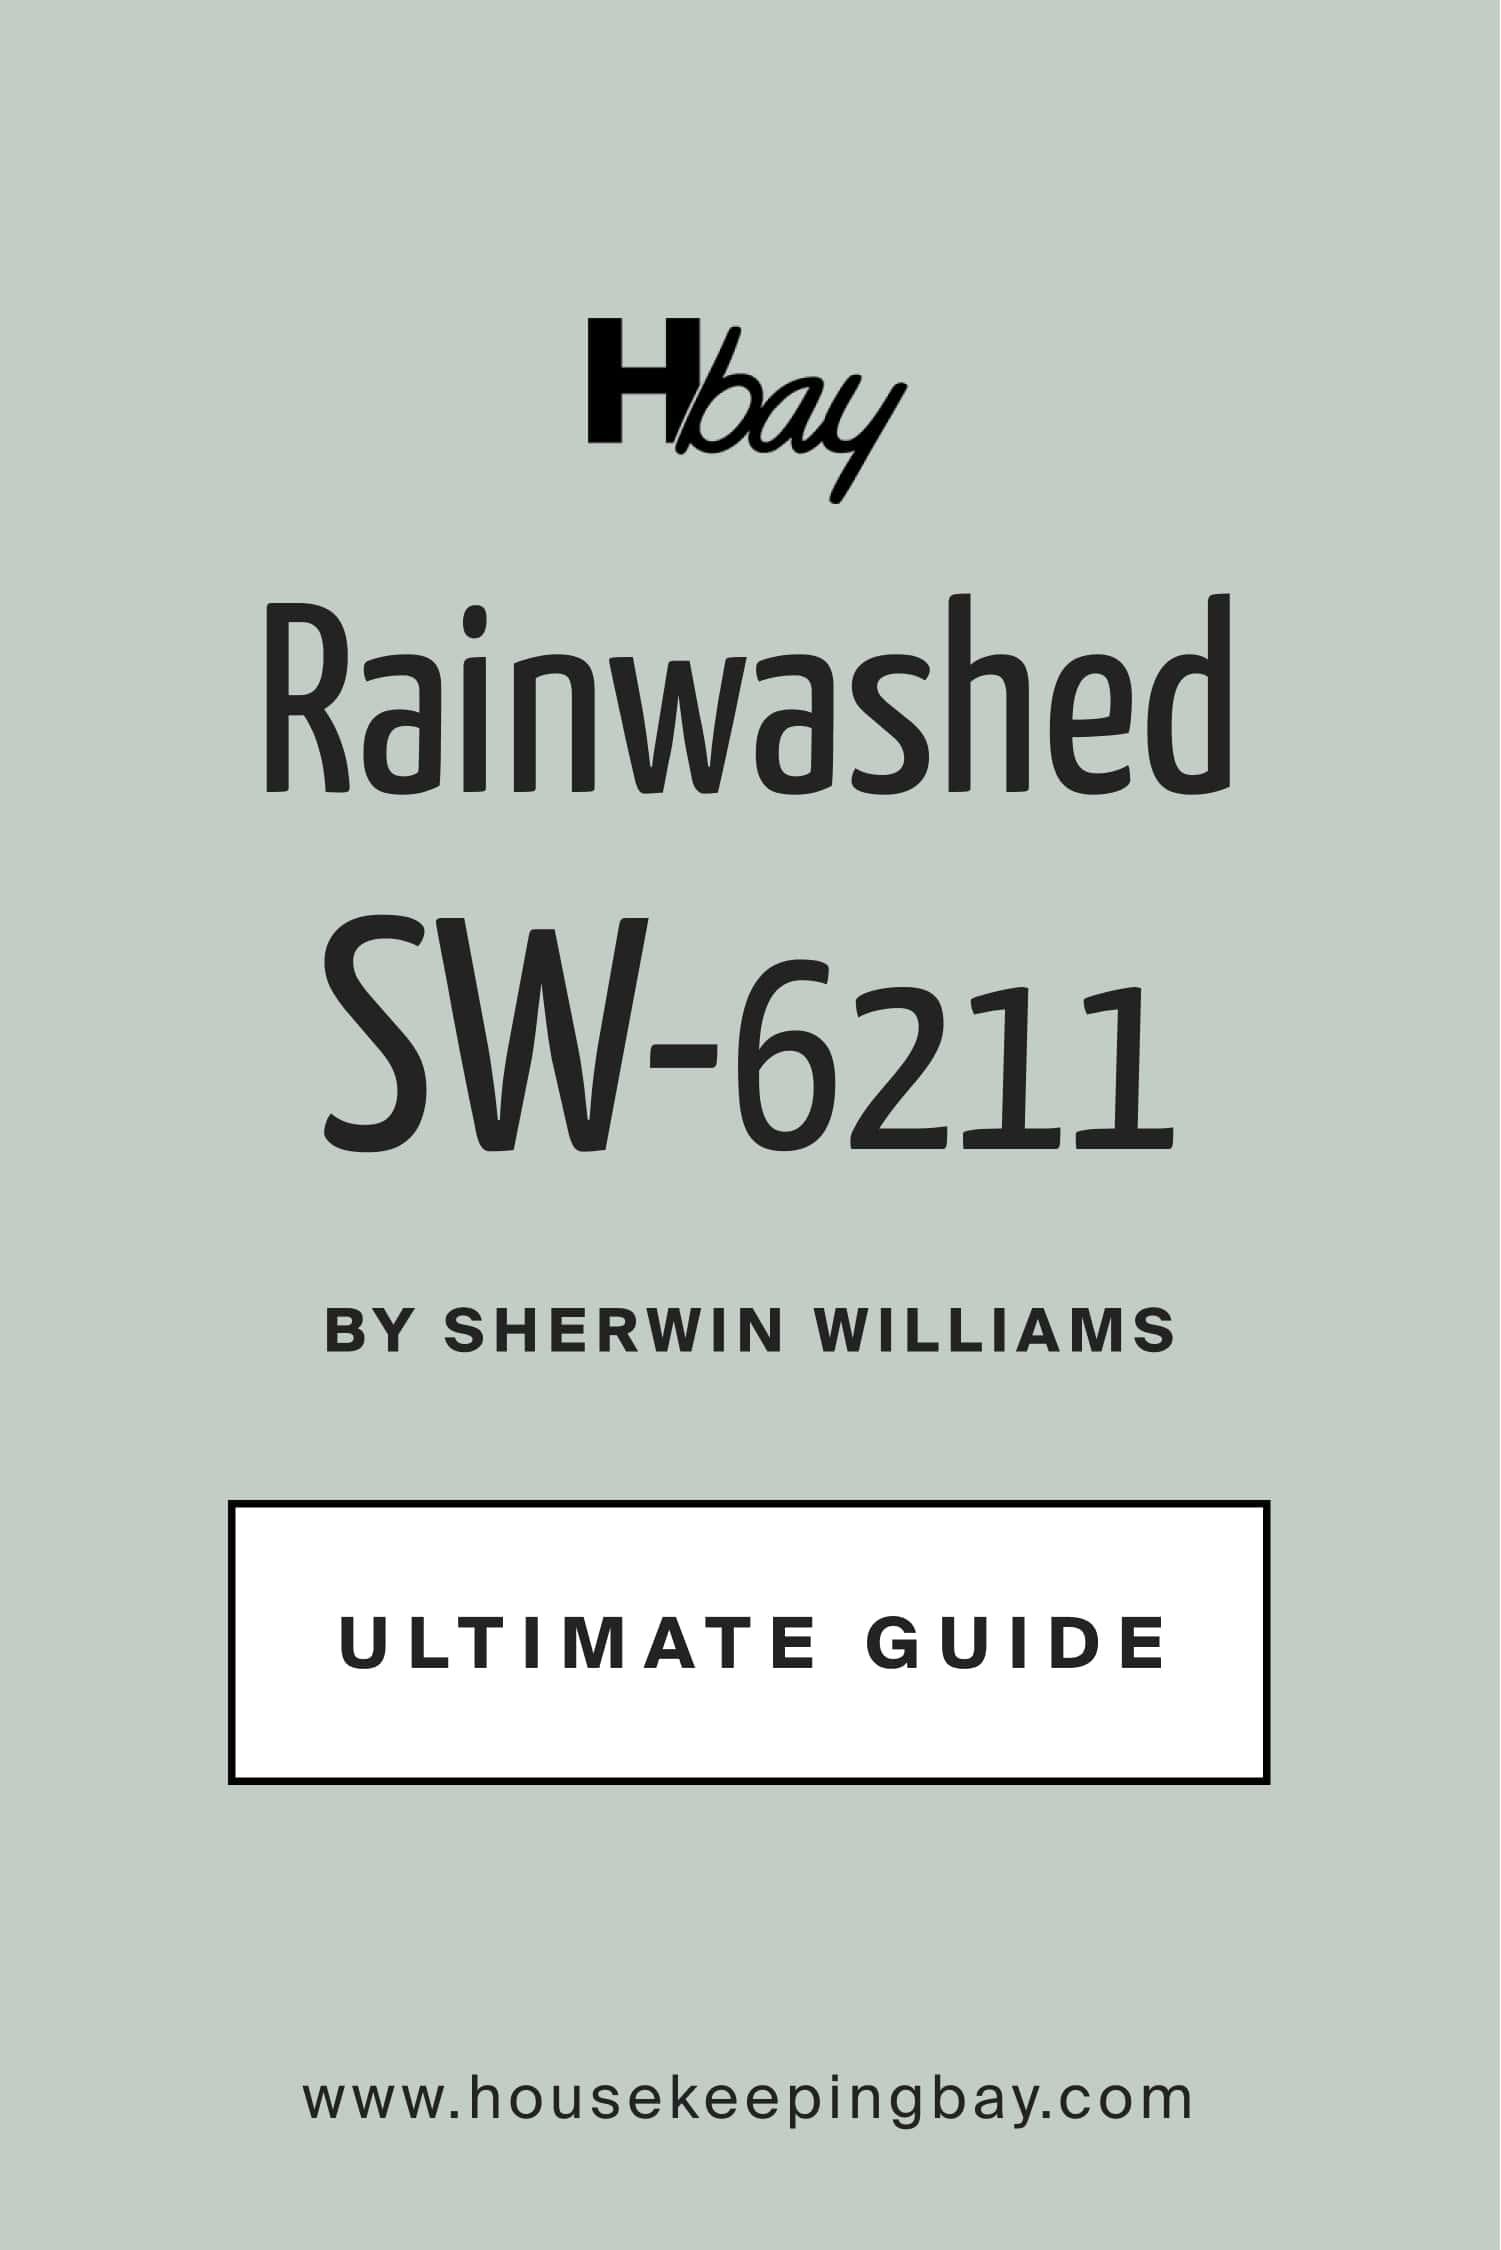 Rainwashed SW 6211 by Sherwin Williams Ultimate Guide